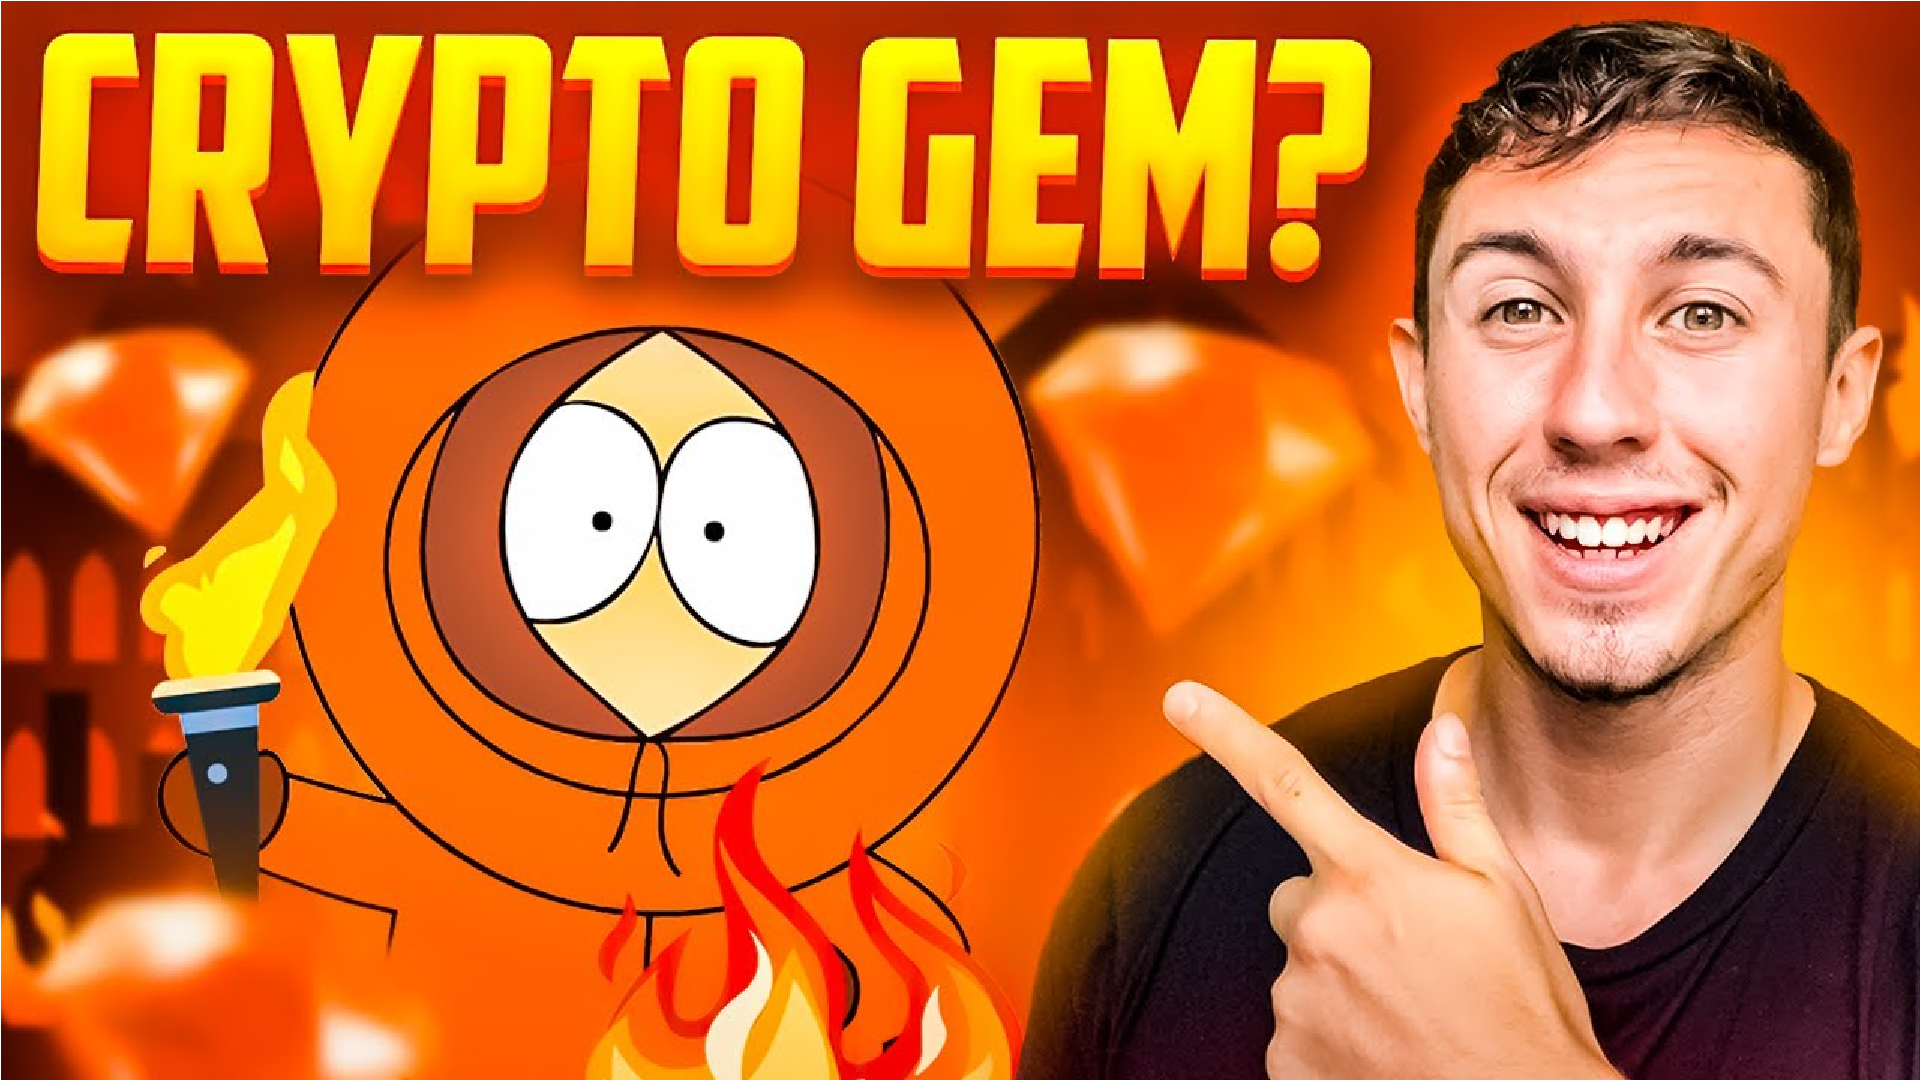 New Deflationary Crypto Presale $KENNY Raises $300,000 Within Hours – 60% Sold Out